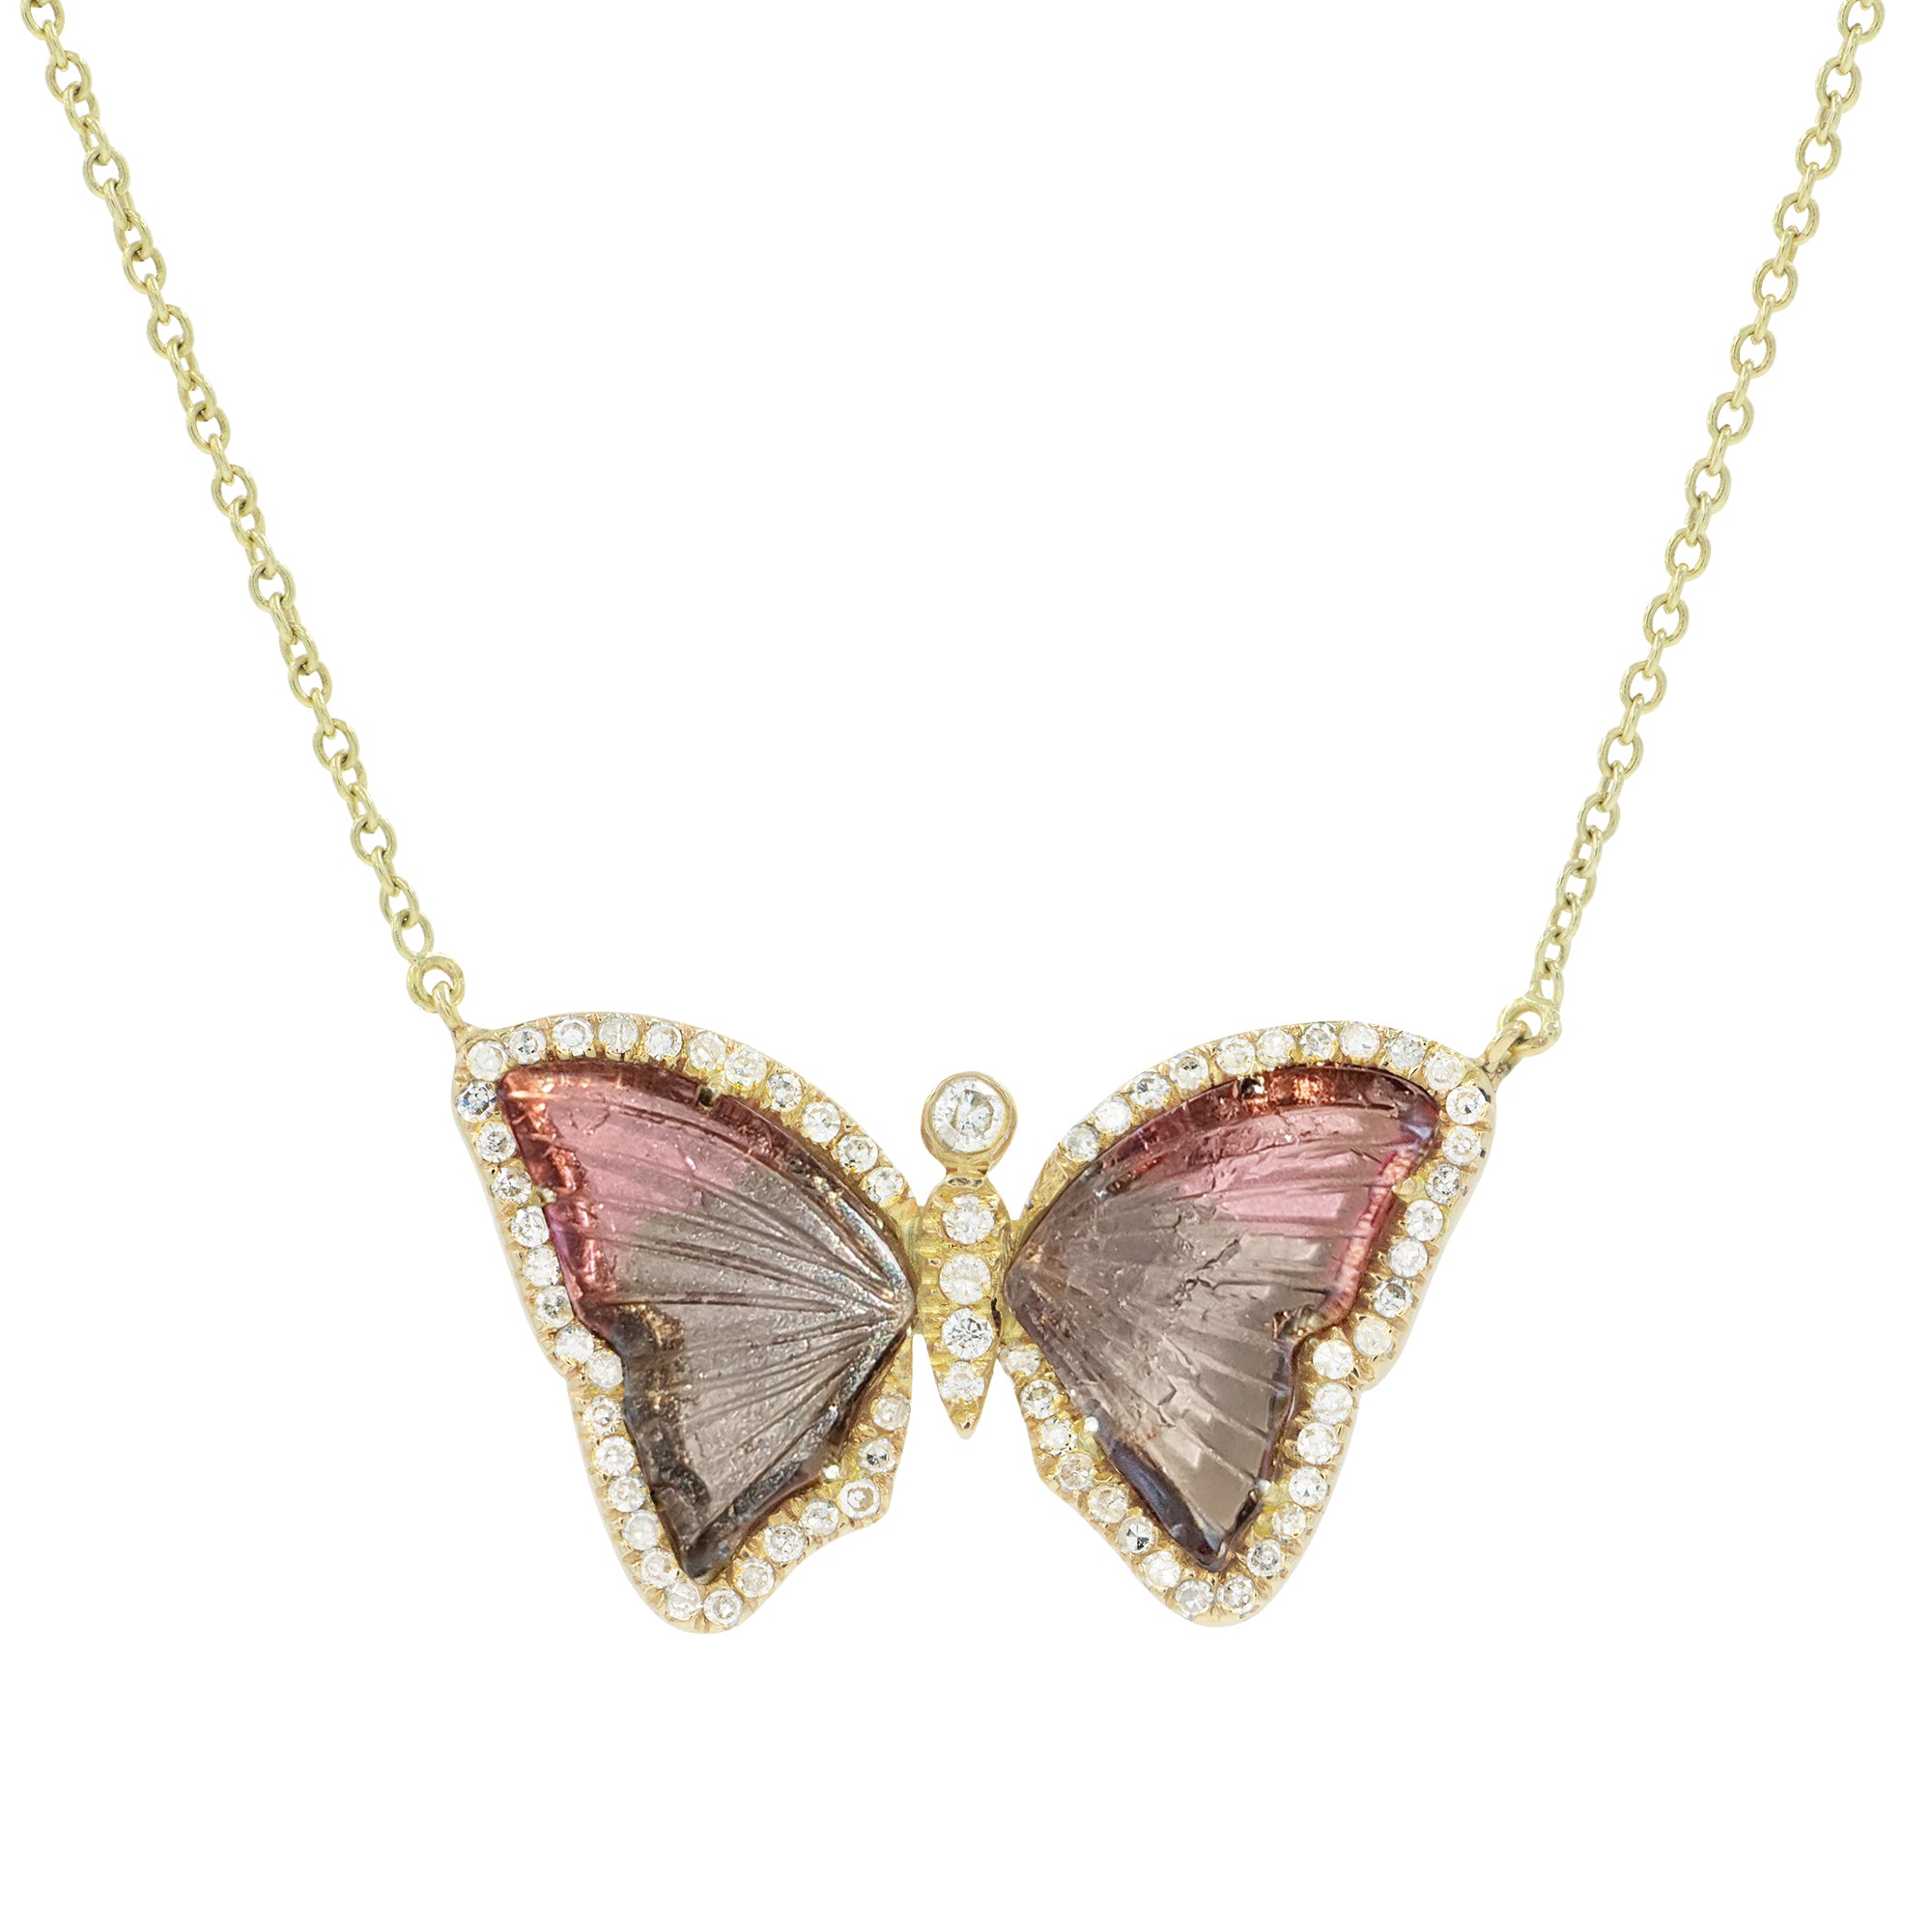 bicolor mauve and pink tourmaline butterfly necklace with diamonds